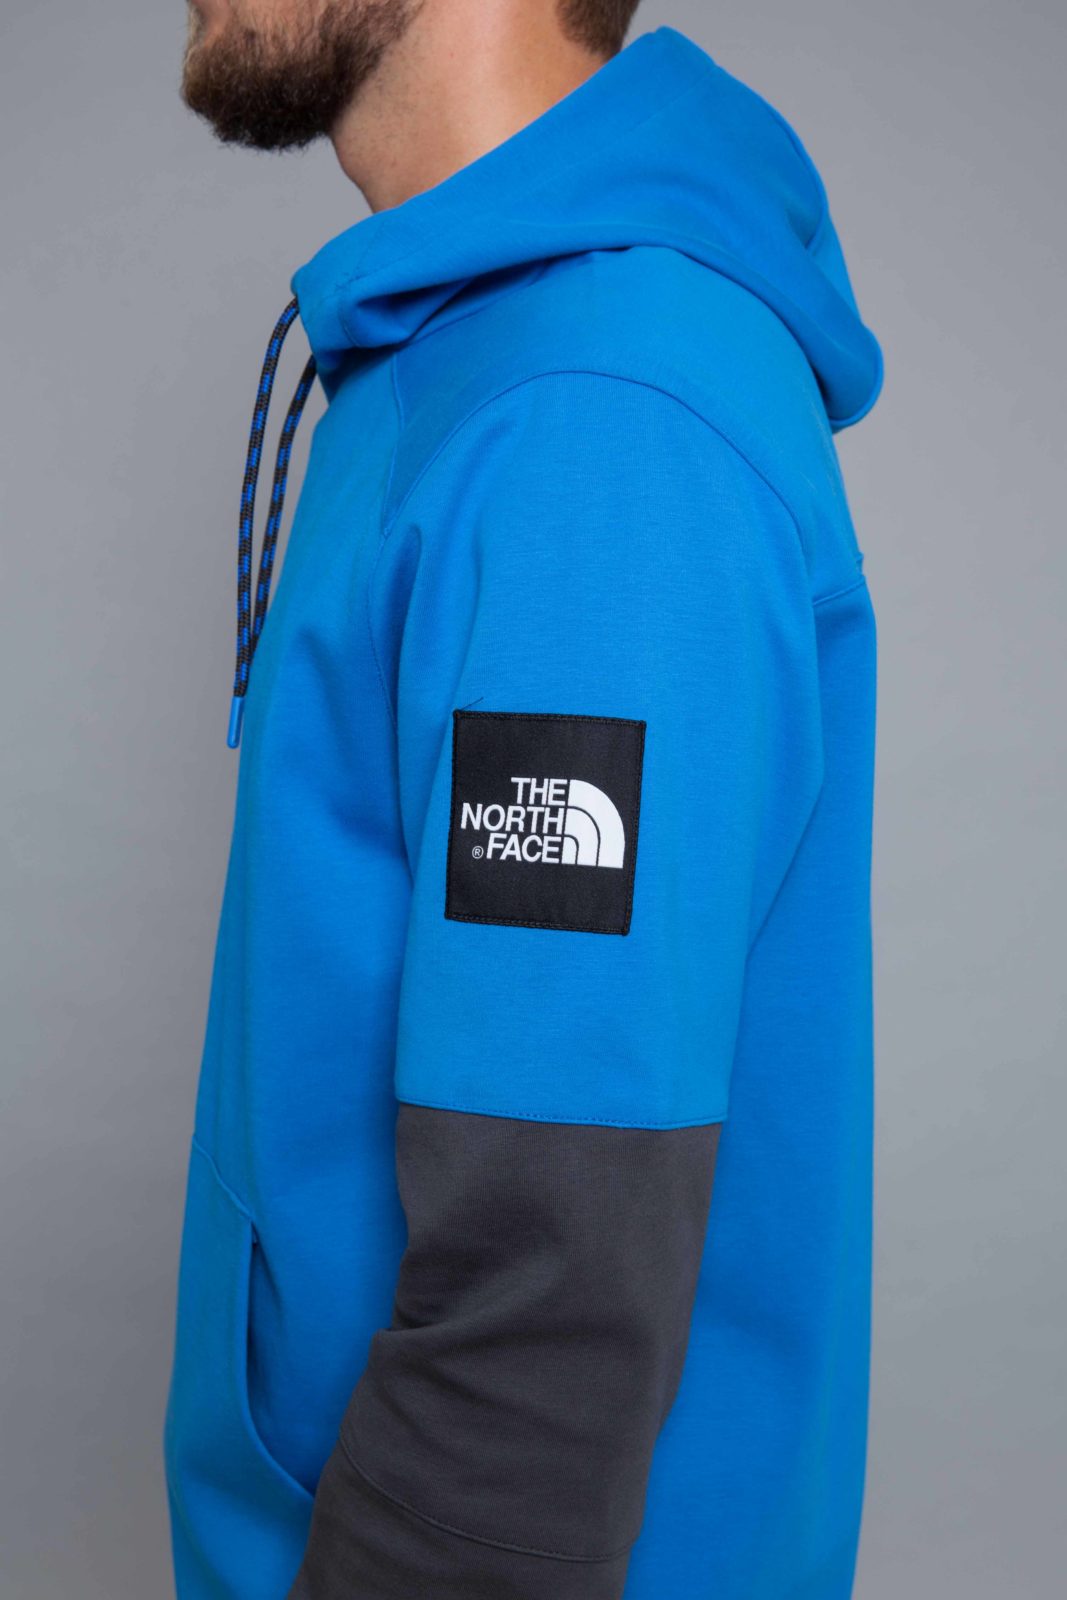 the north face hoodie blue Online 